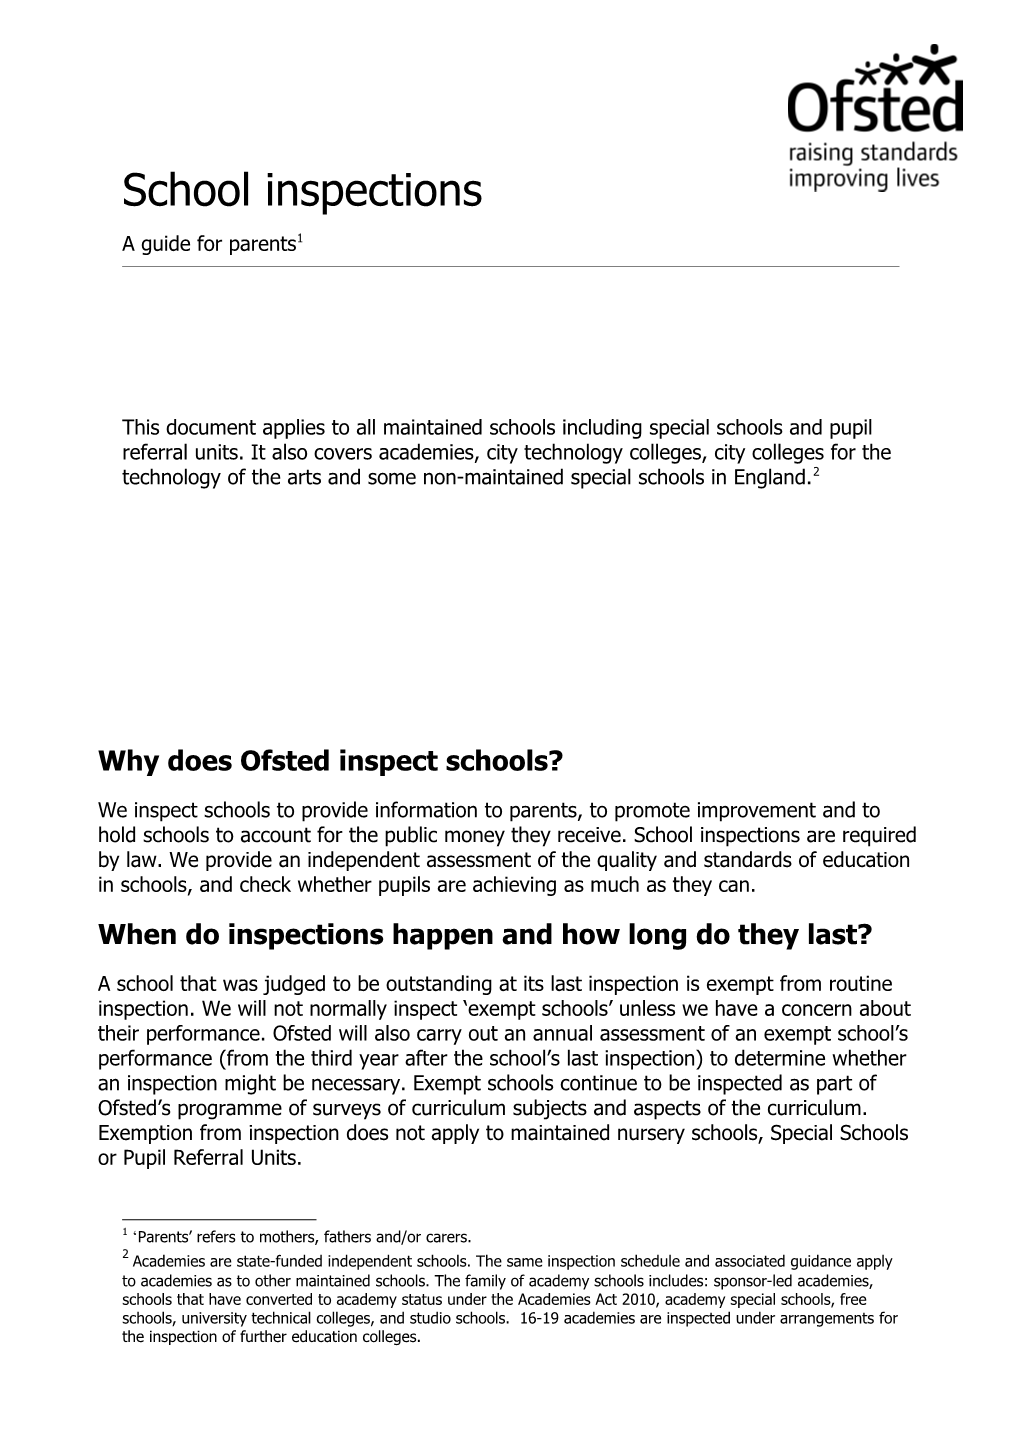 School Inspections - a Guide for Parents s1